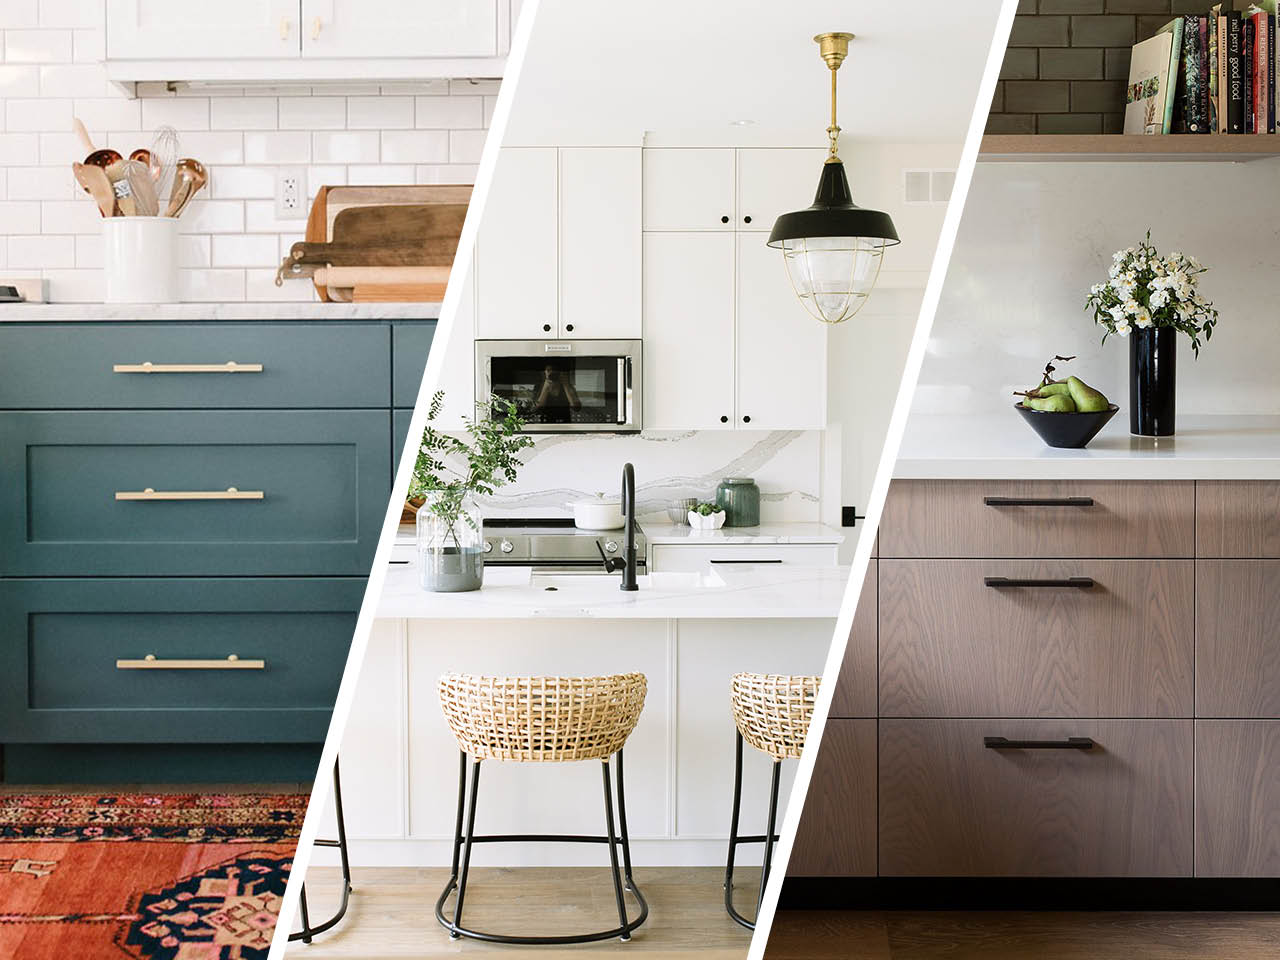 18 Of The Most Gorgeous Kitchen Design Ideas On Pinterest   Chatelaine